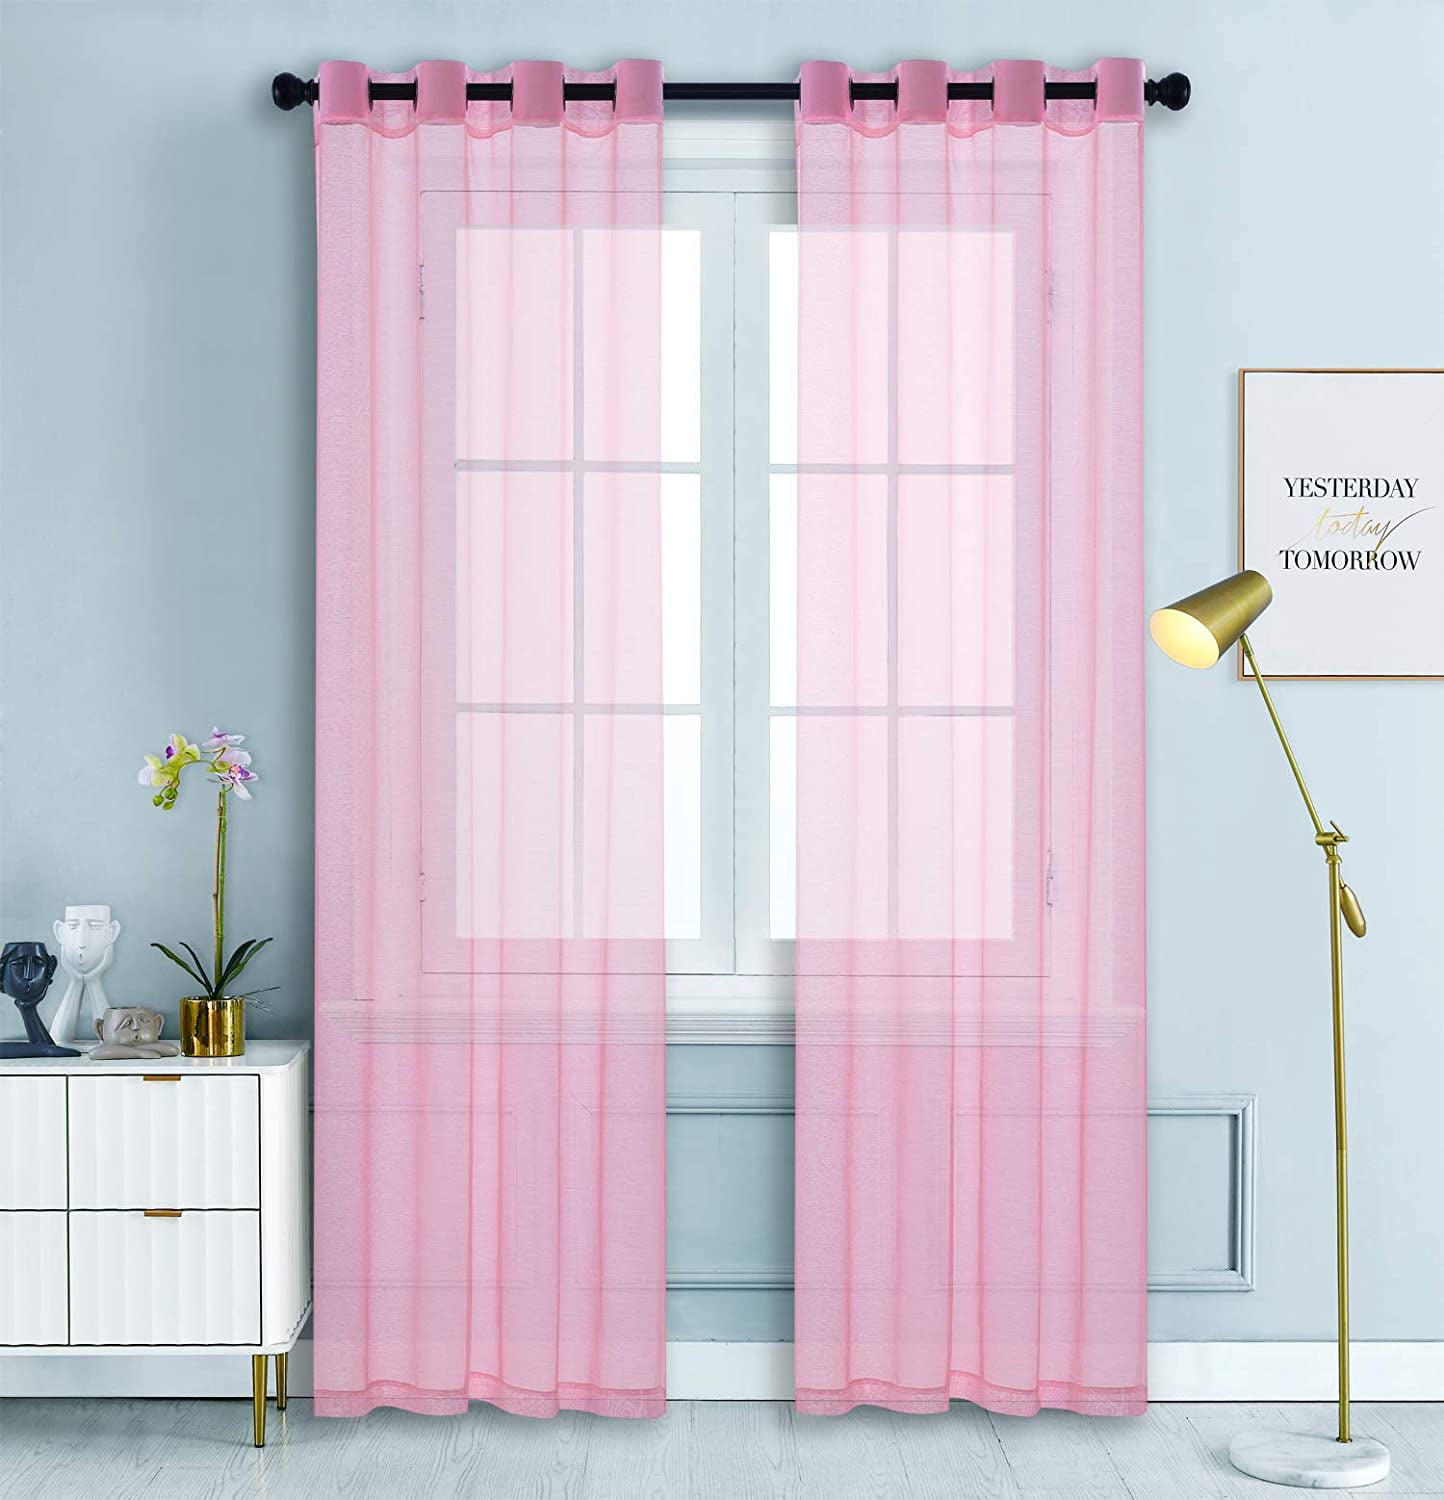 SET OF 2 SHEER VOILE CURTAINS 84" LONG PINK ROSE 